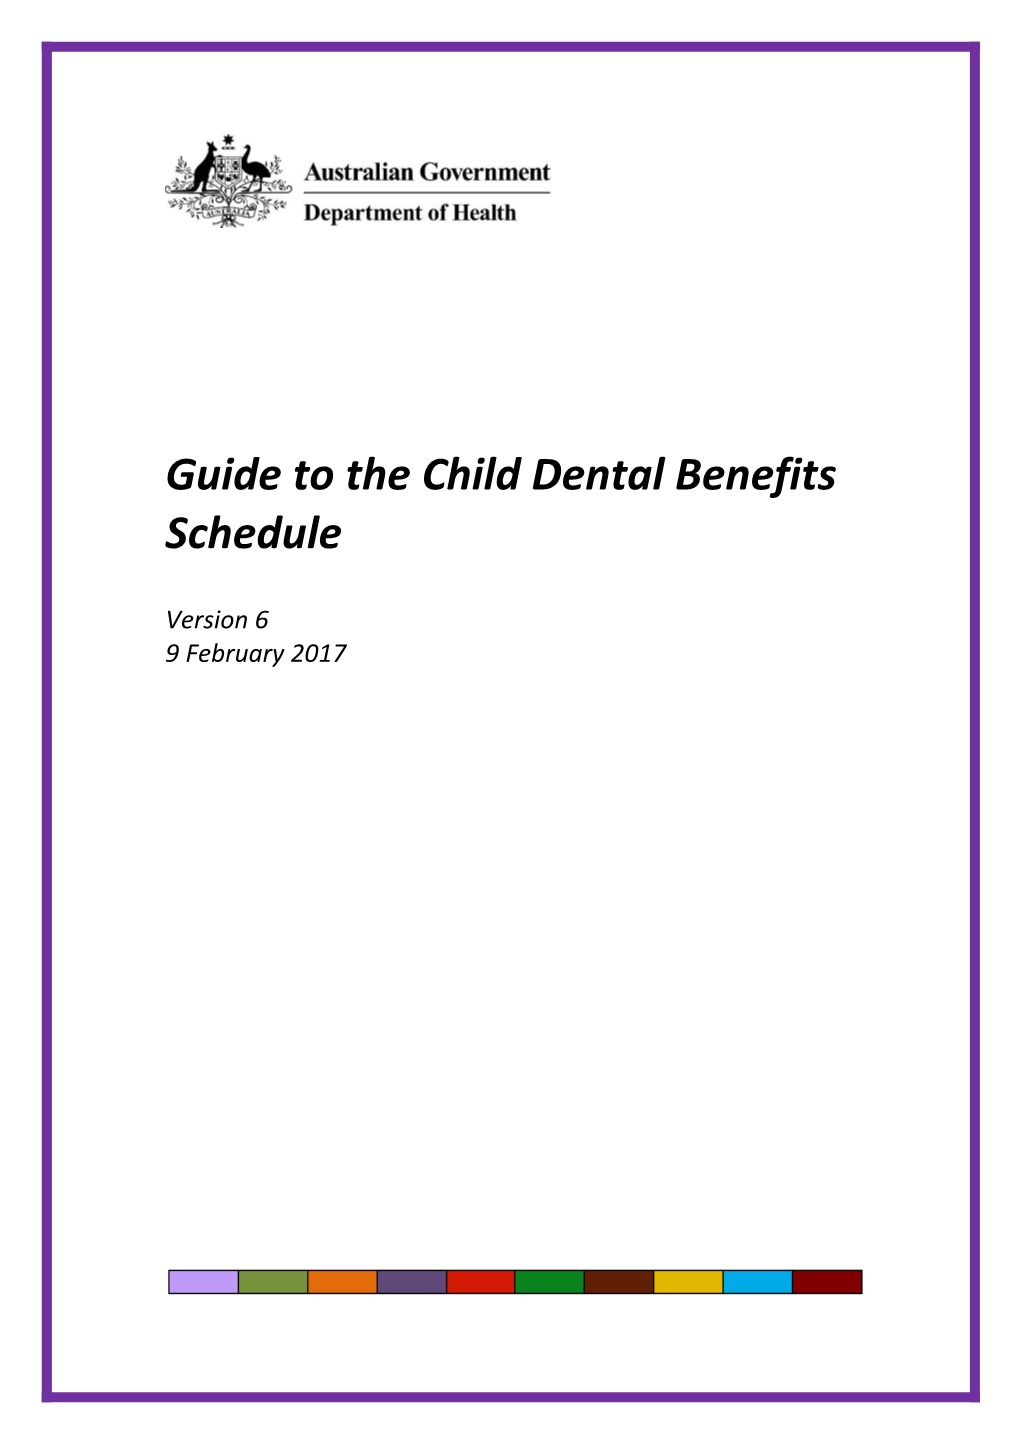 Guide to the Child Dental Benefits Schedule